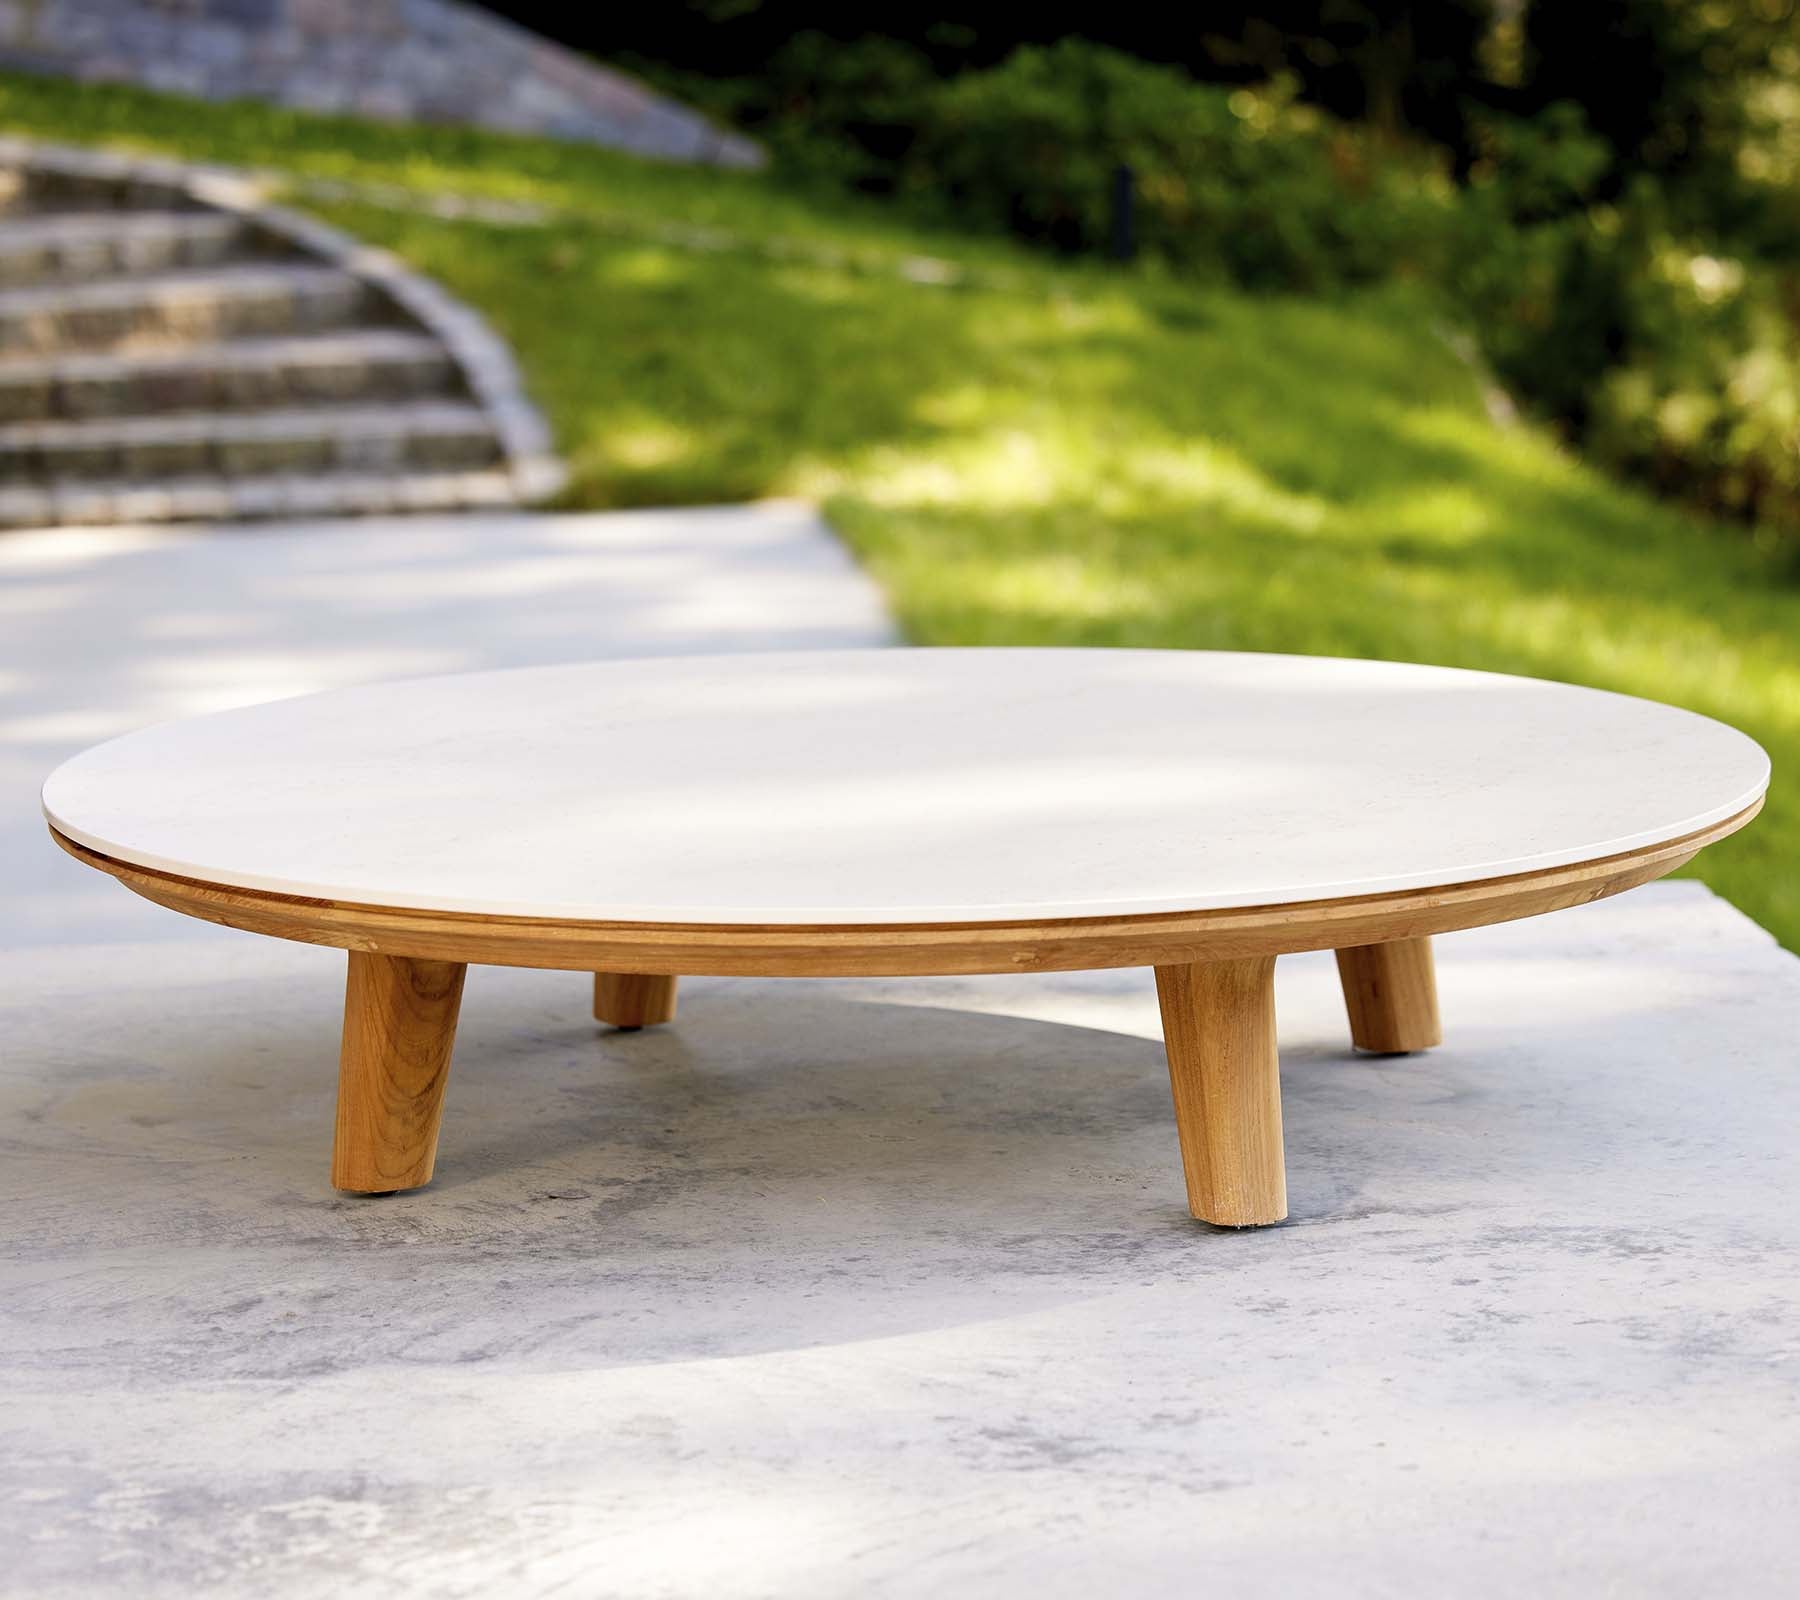 Cane-line Aspect Dining Table | Juniper House